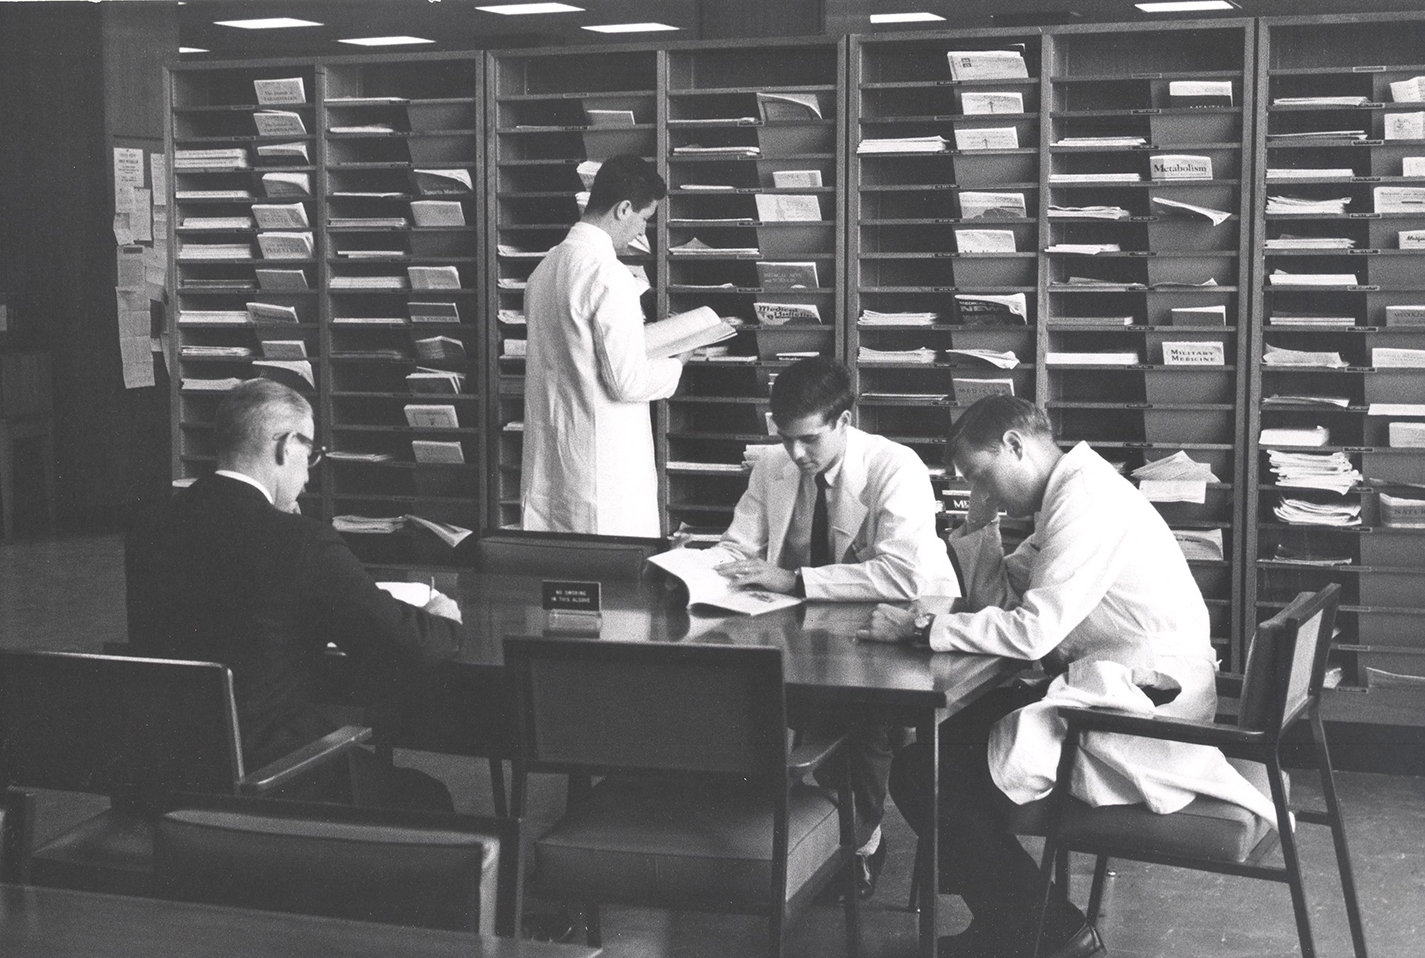 The Samuel J. Wood Library opens in 1962 as part of an expansion of Weill Cornell Medical College. Photo credit: Jules Zalon Courtesy of Medical Center Archives of NewYork-Presbyterian/Weill Cornell.